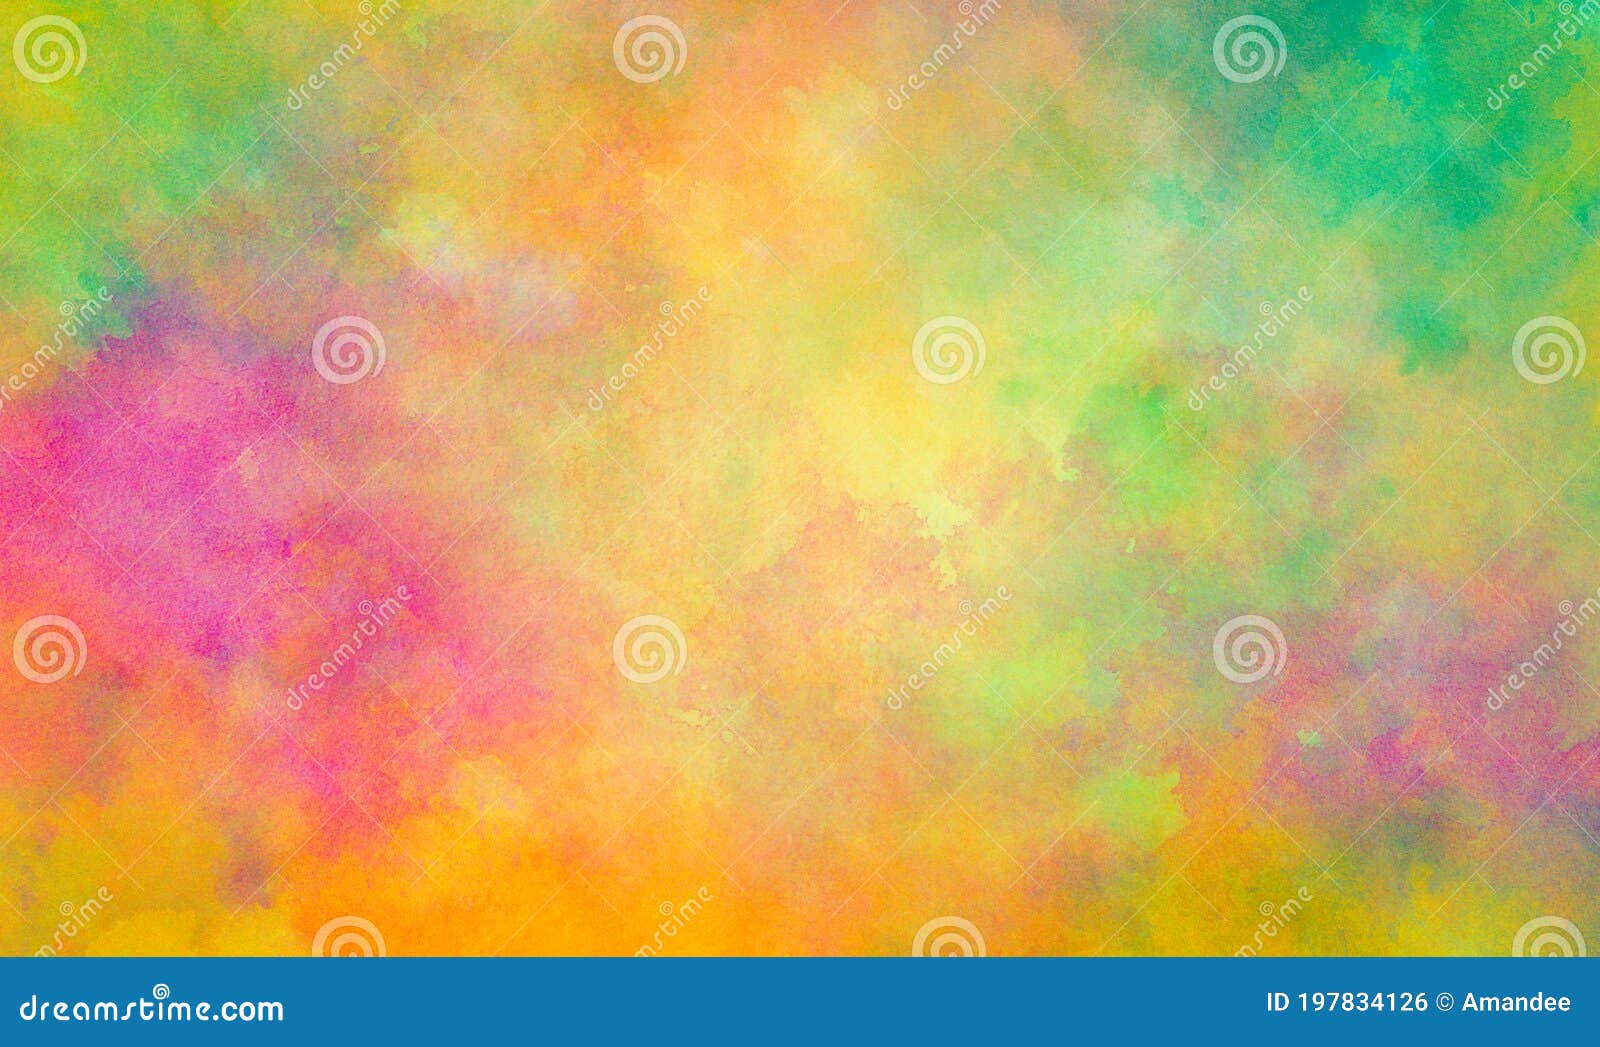 colorful watercolor background of abstract sunset or easter sunrise sky with puffy color splash clouds in bright painted colors of